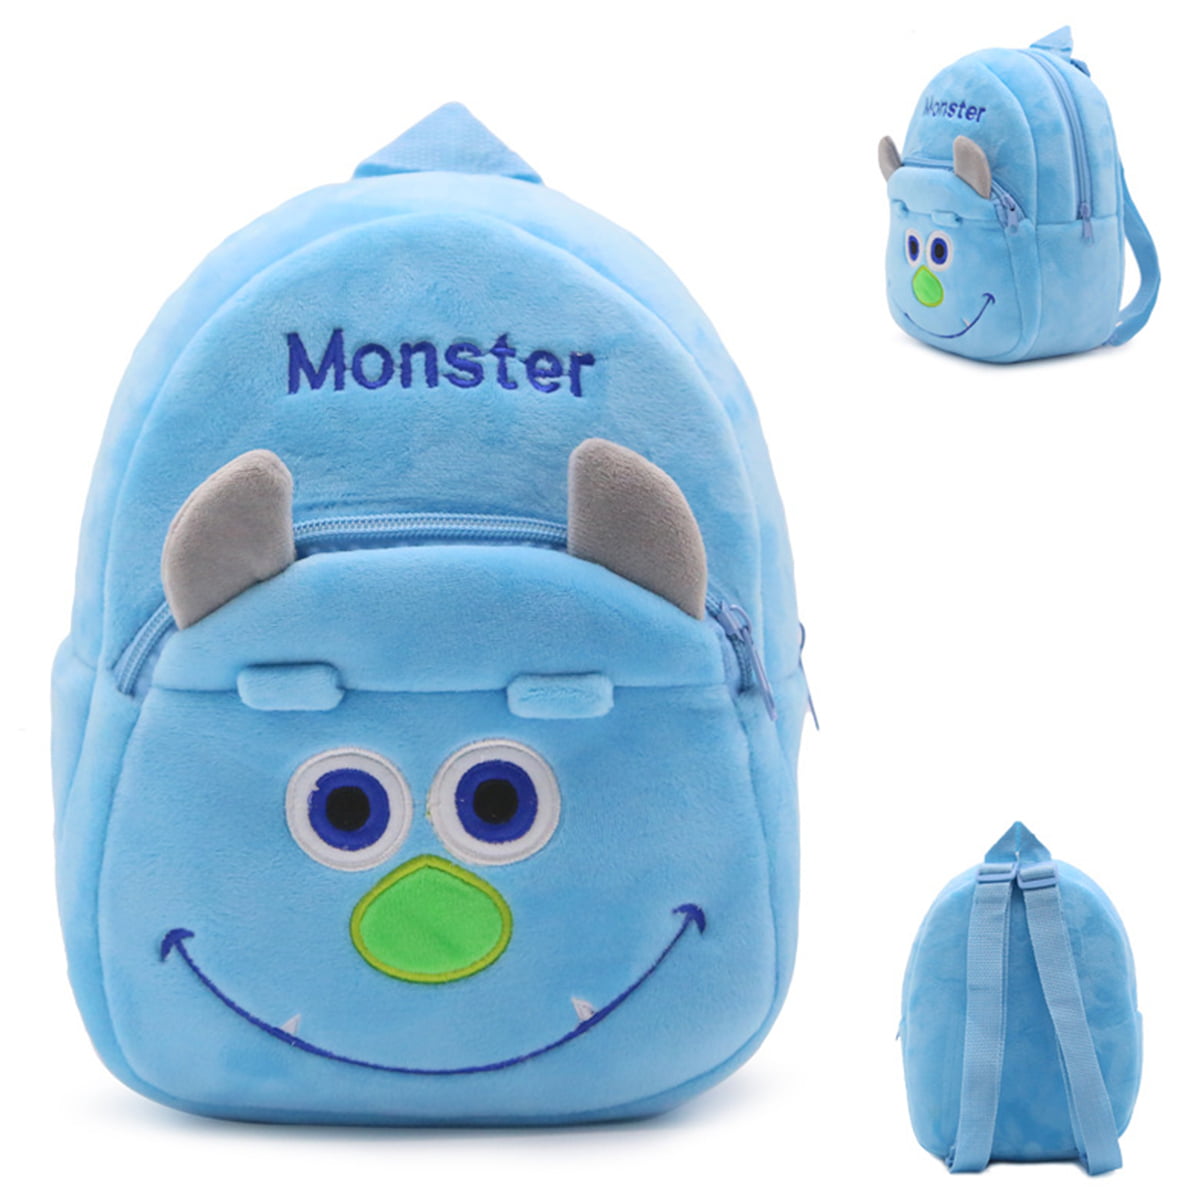 New Toddler’s Backpack,Toddler’s Mini School Bags Cartoon Cute Animal Plush Backpack for Kids Age 1-4 Years bear 